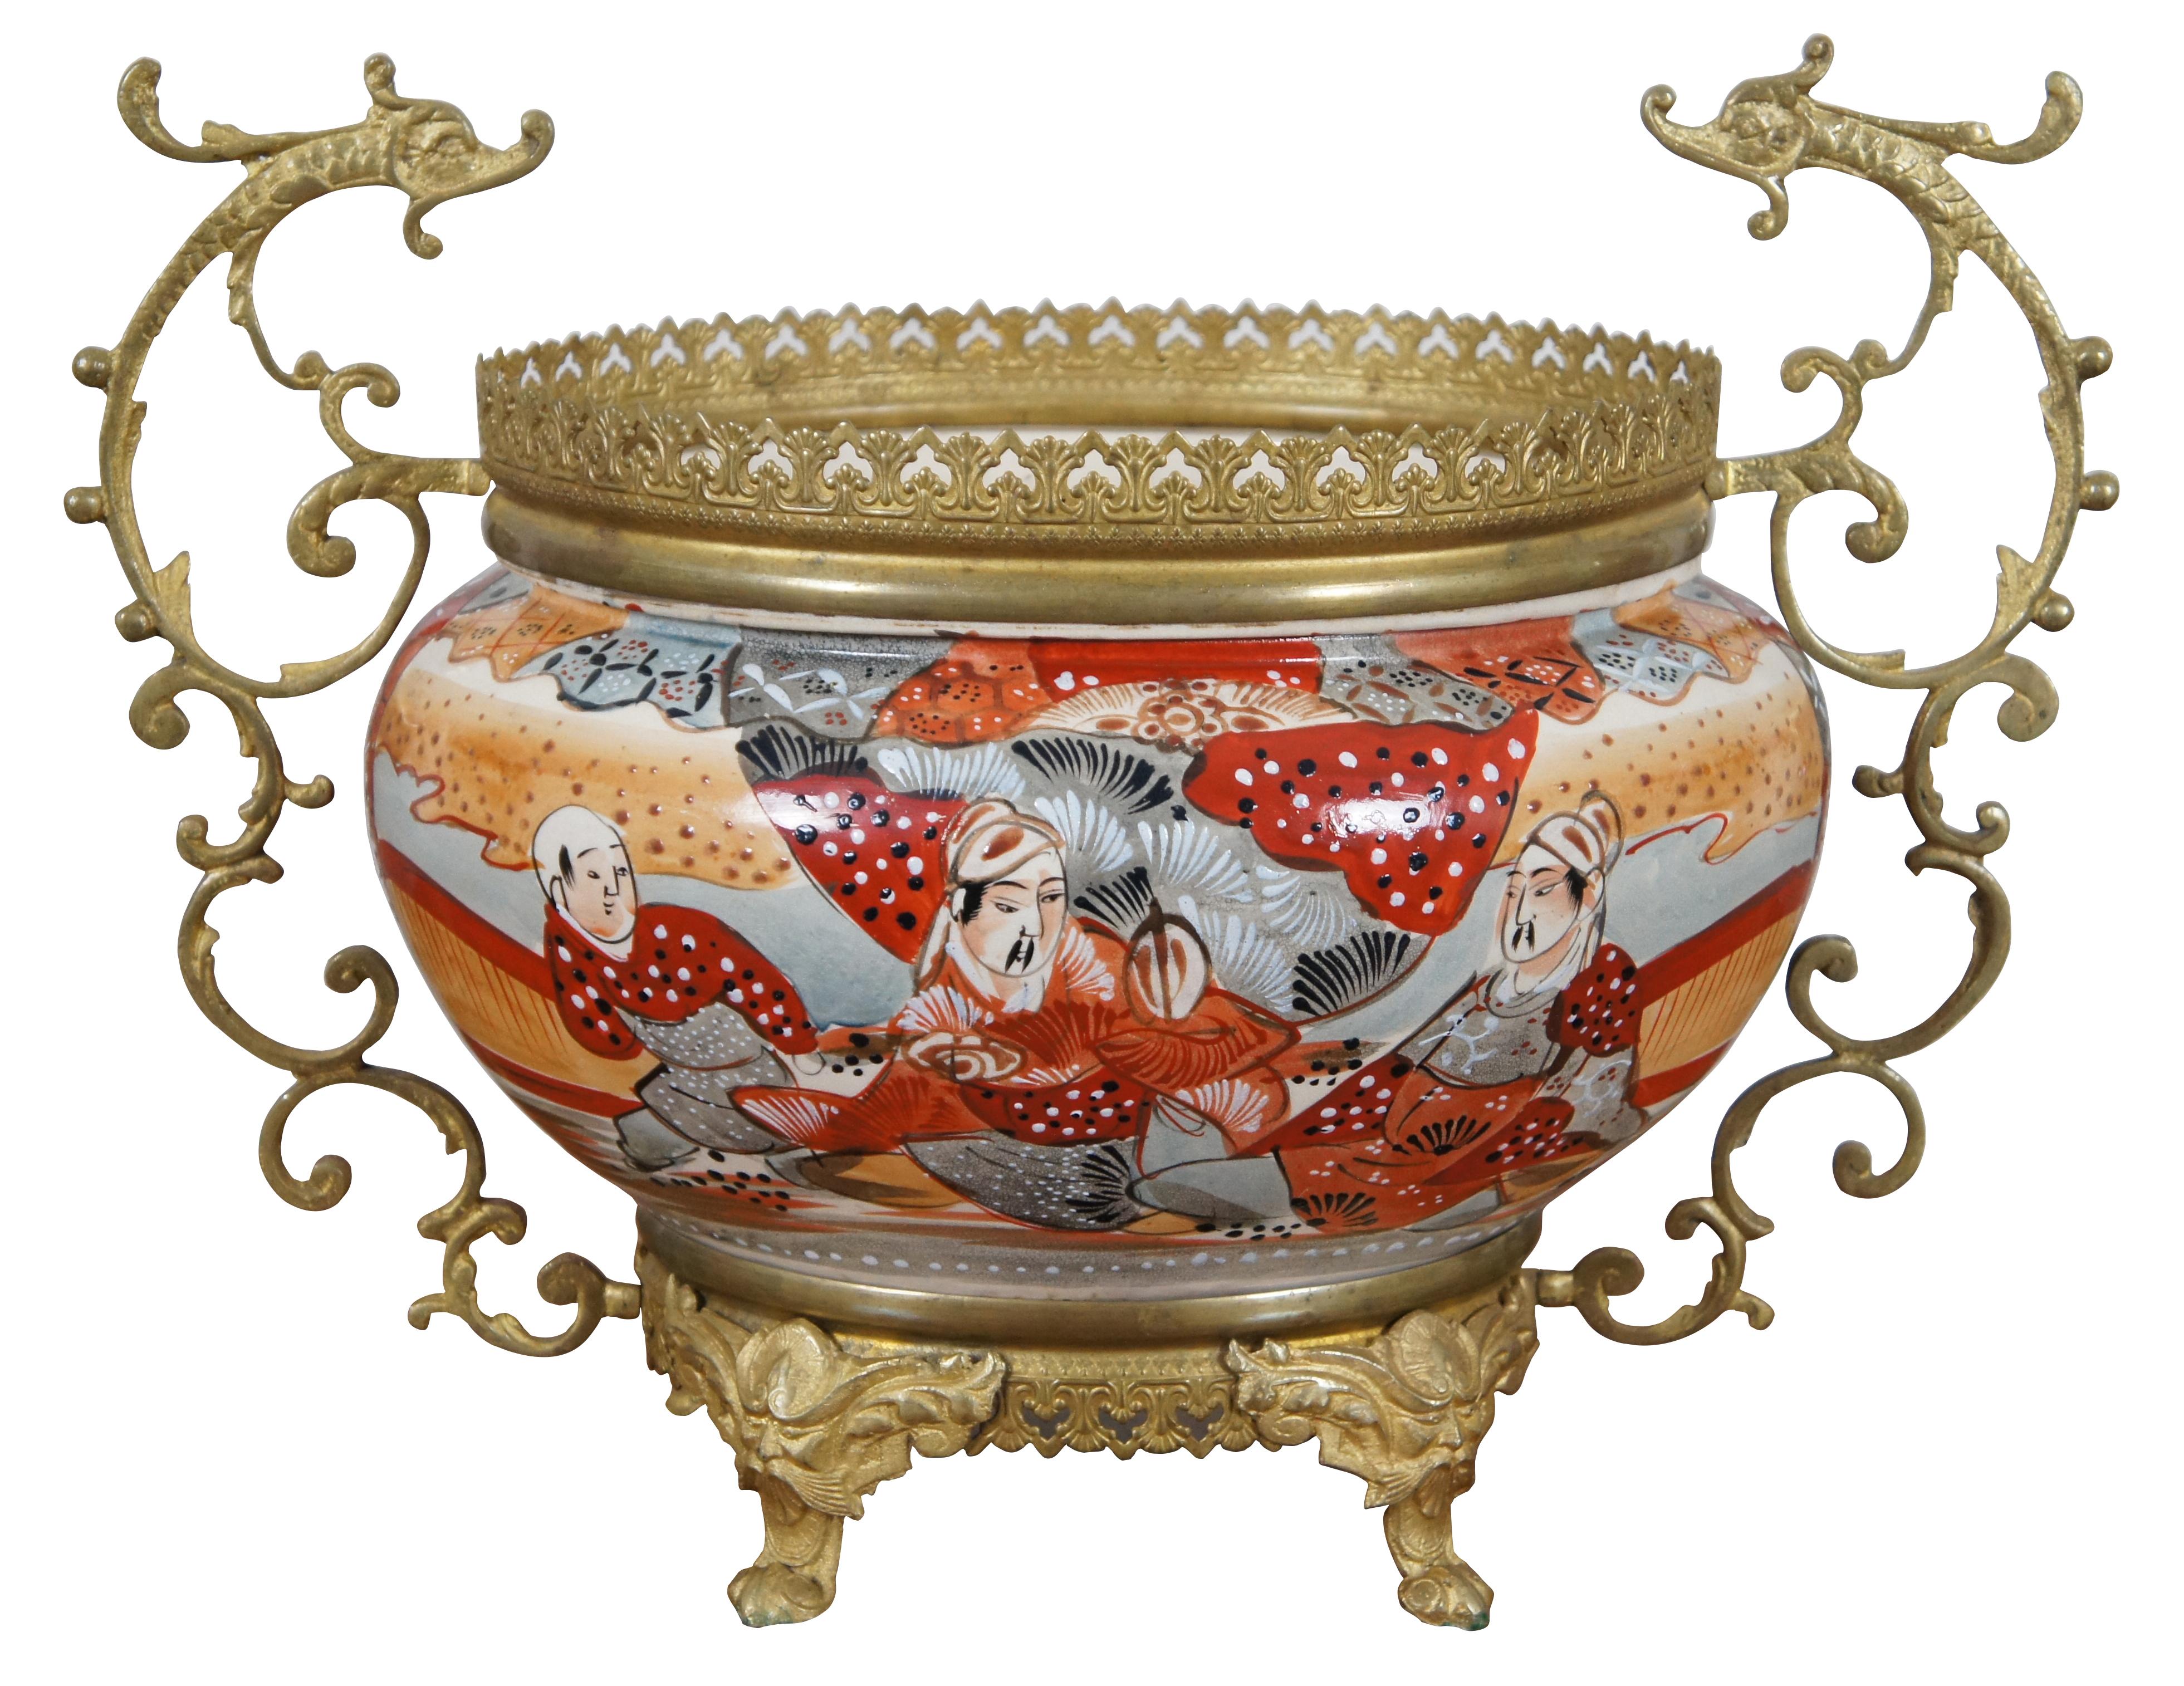 Rare antique parlor set of Japanese Satsuma porcelain and brass Kosmos Brenner oil lamps and jardinière / cache pot / planter / urn. Both are moriage painted with red, orange, gray and white figures and designs. The bases of the ginger jar shaped